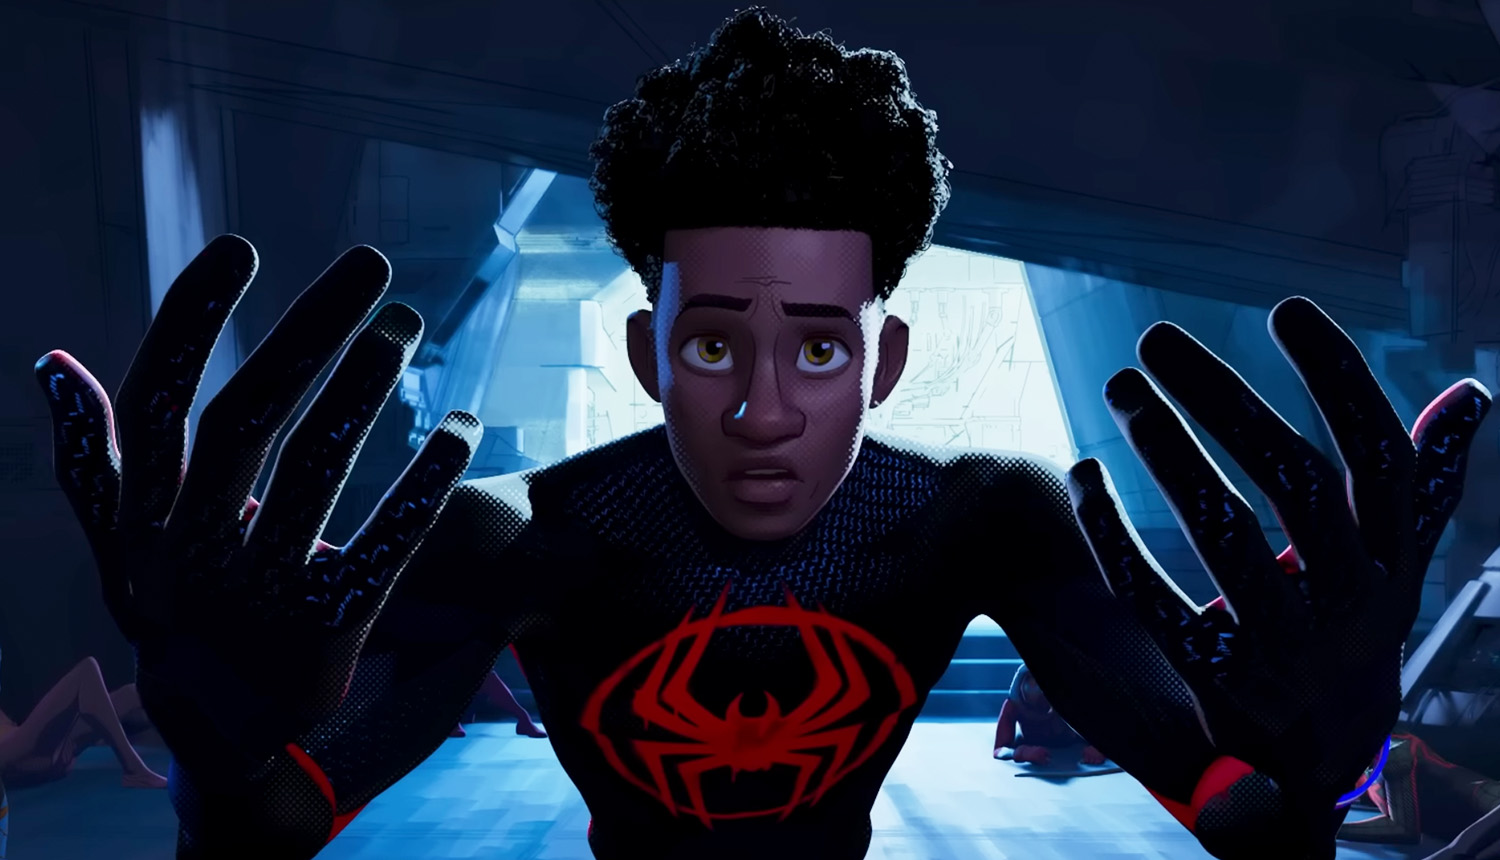 Marvel Spider-Man: Across The Spider-Verse - Miles Morales One